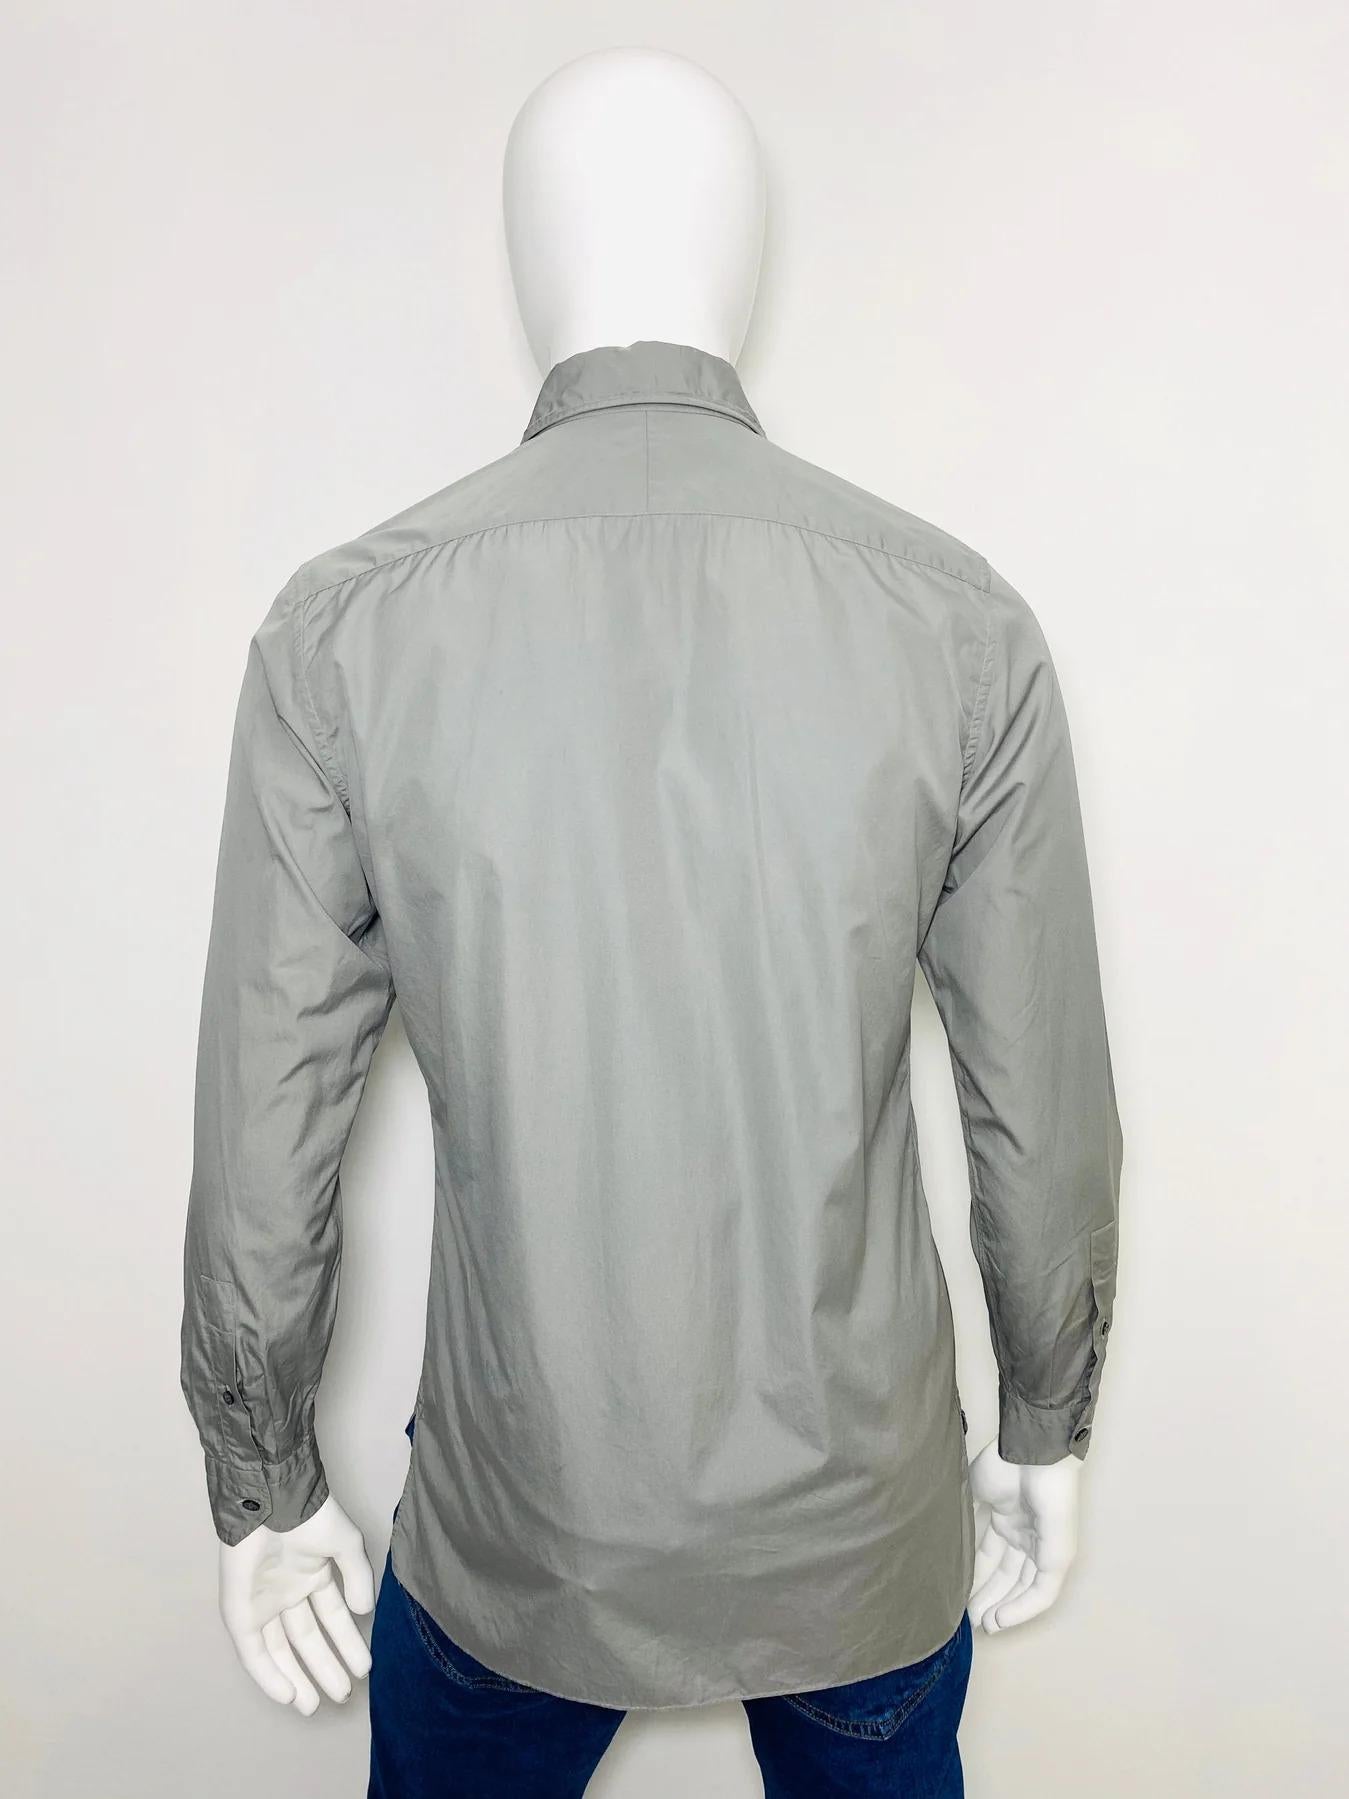 Lanvin Grey Cotton Shirt In Excellent Condition For Sale In London, GB